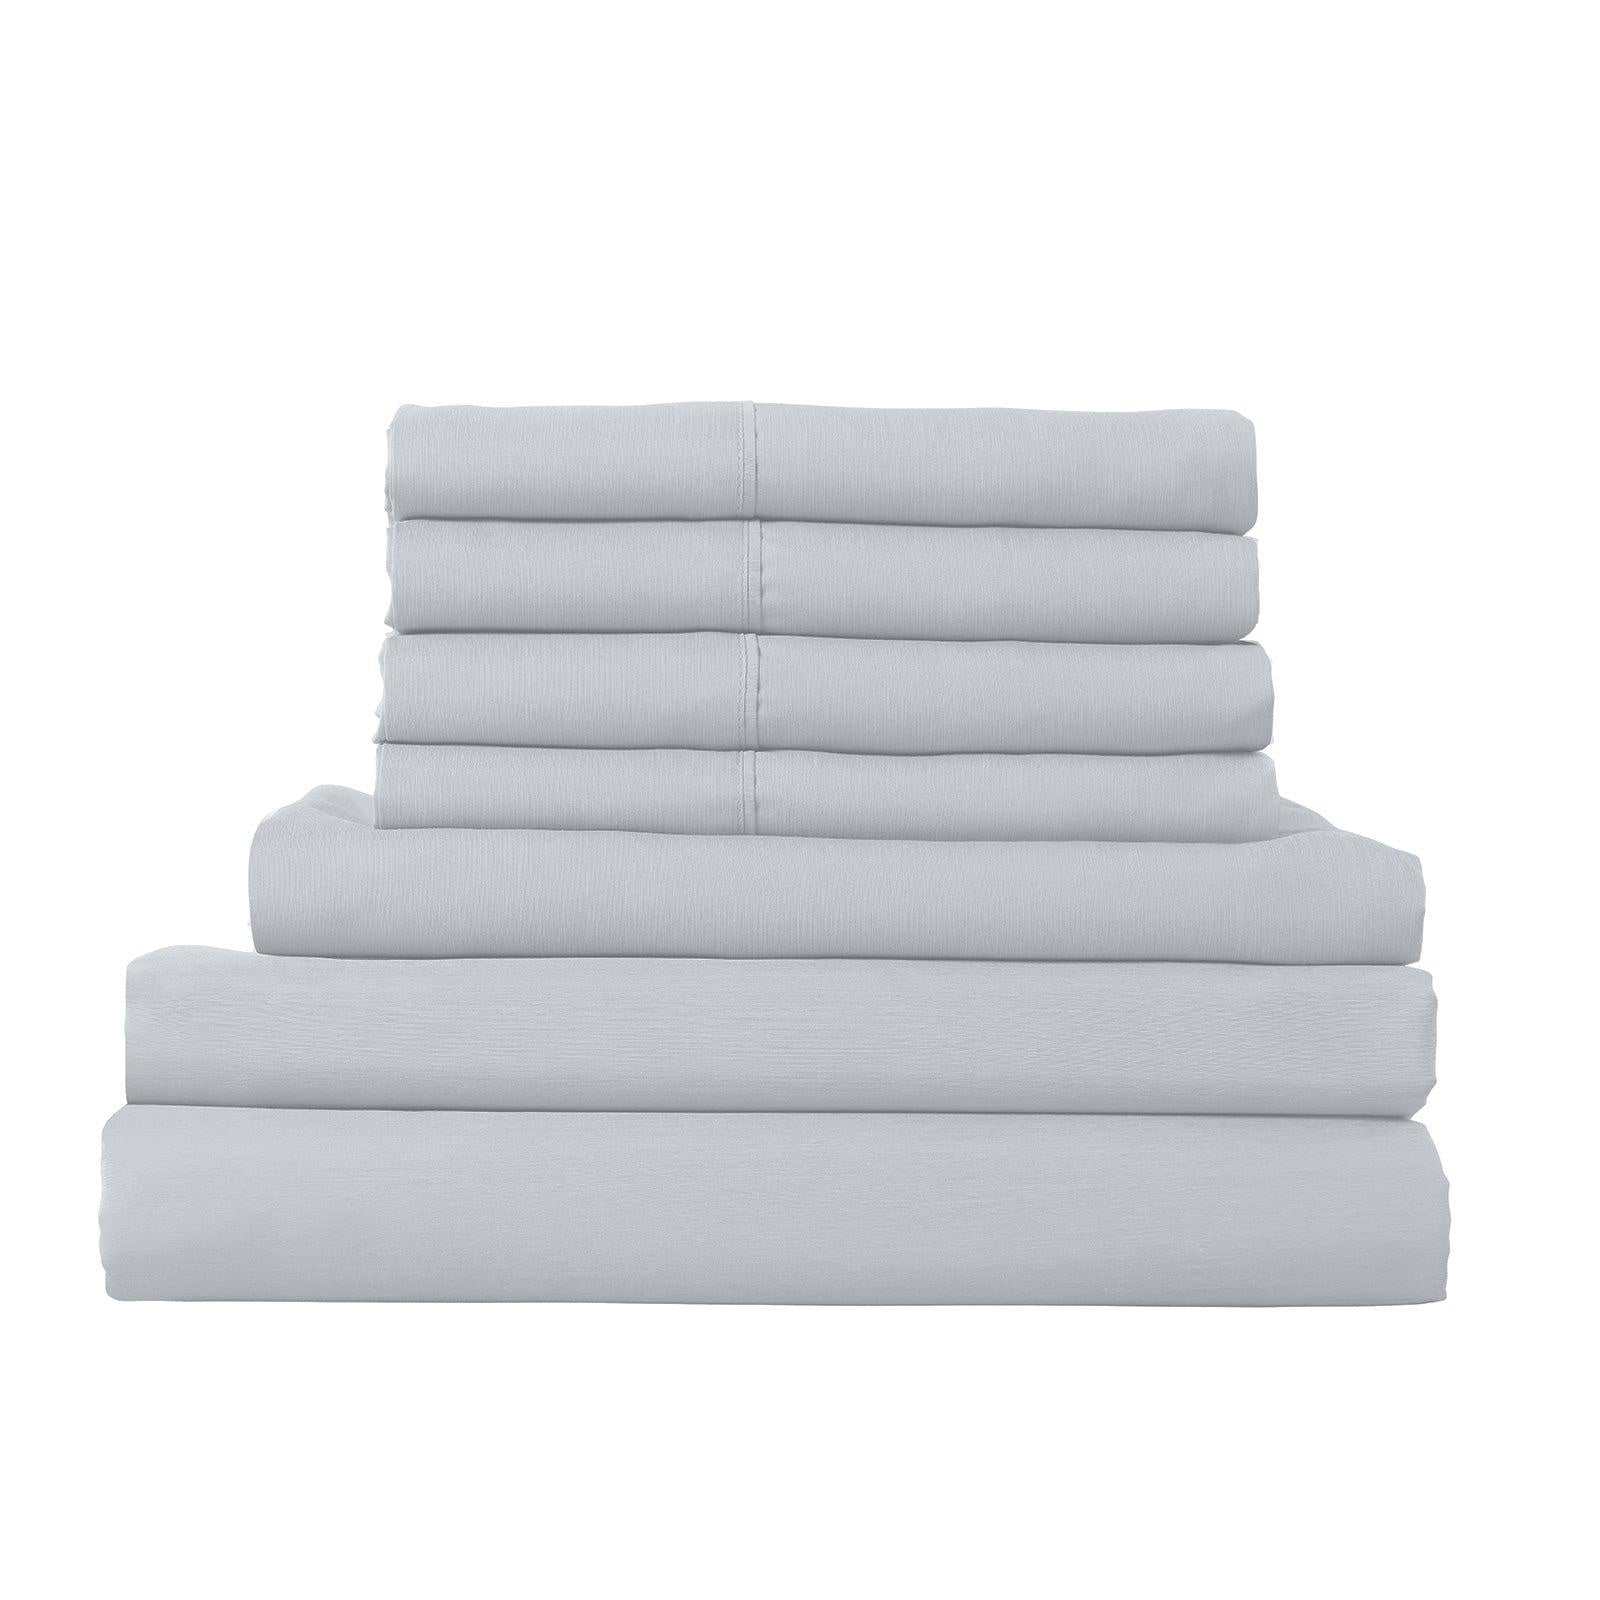 1500 Thread Count 6 Piece Combo And 2 Pack Duck Feather Down Pillows Bedding Set Indigo King Deals499